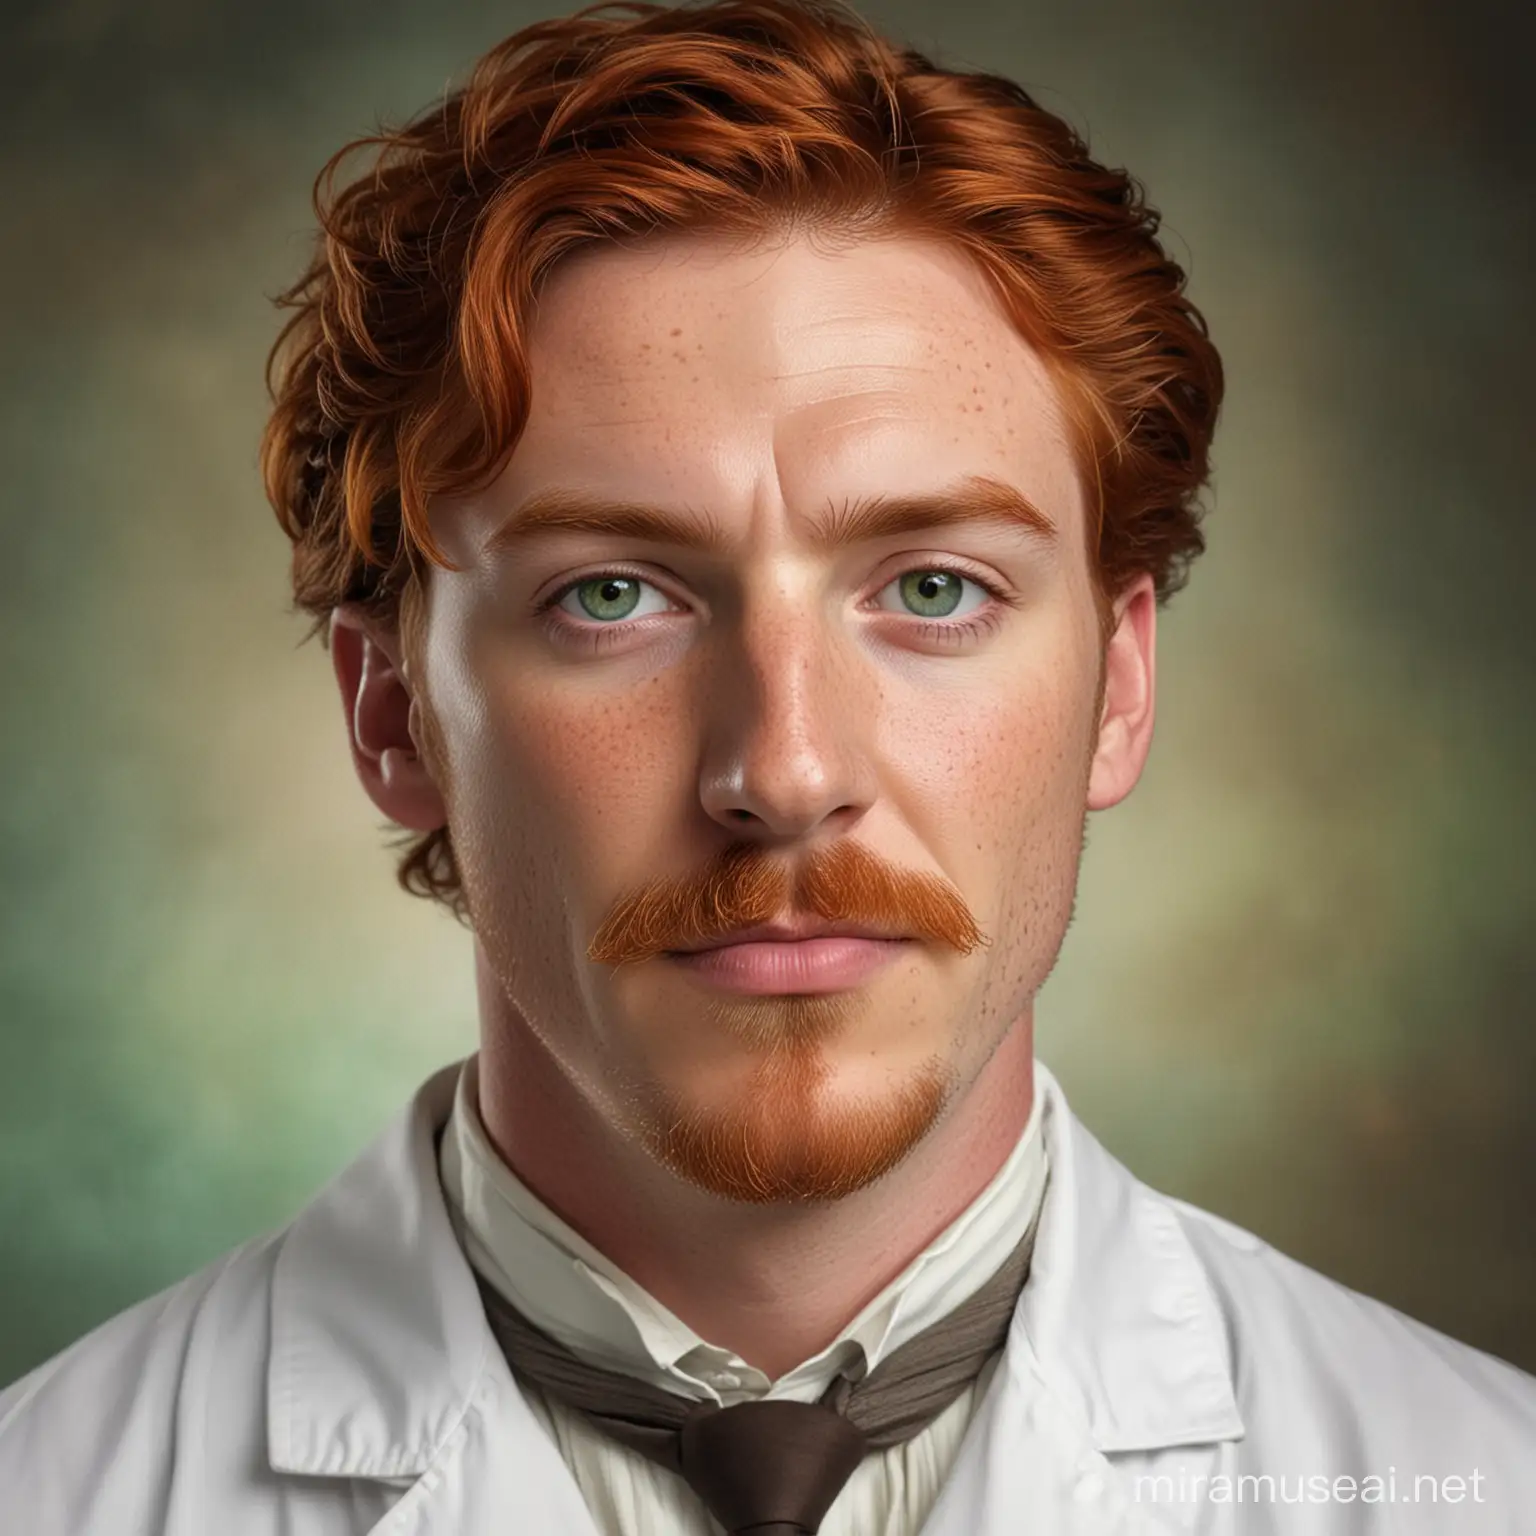 Freckled RedHaired 19th Century Doctor in White Coat